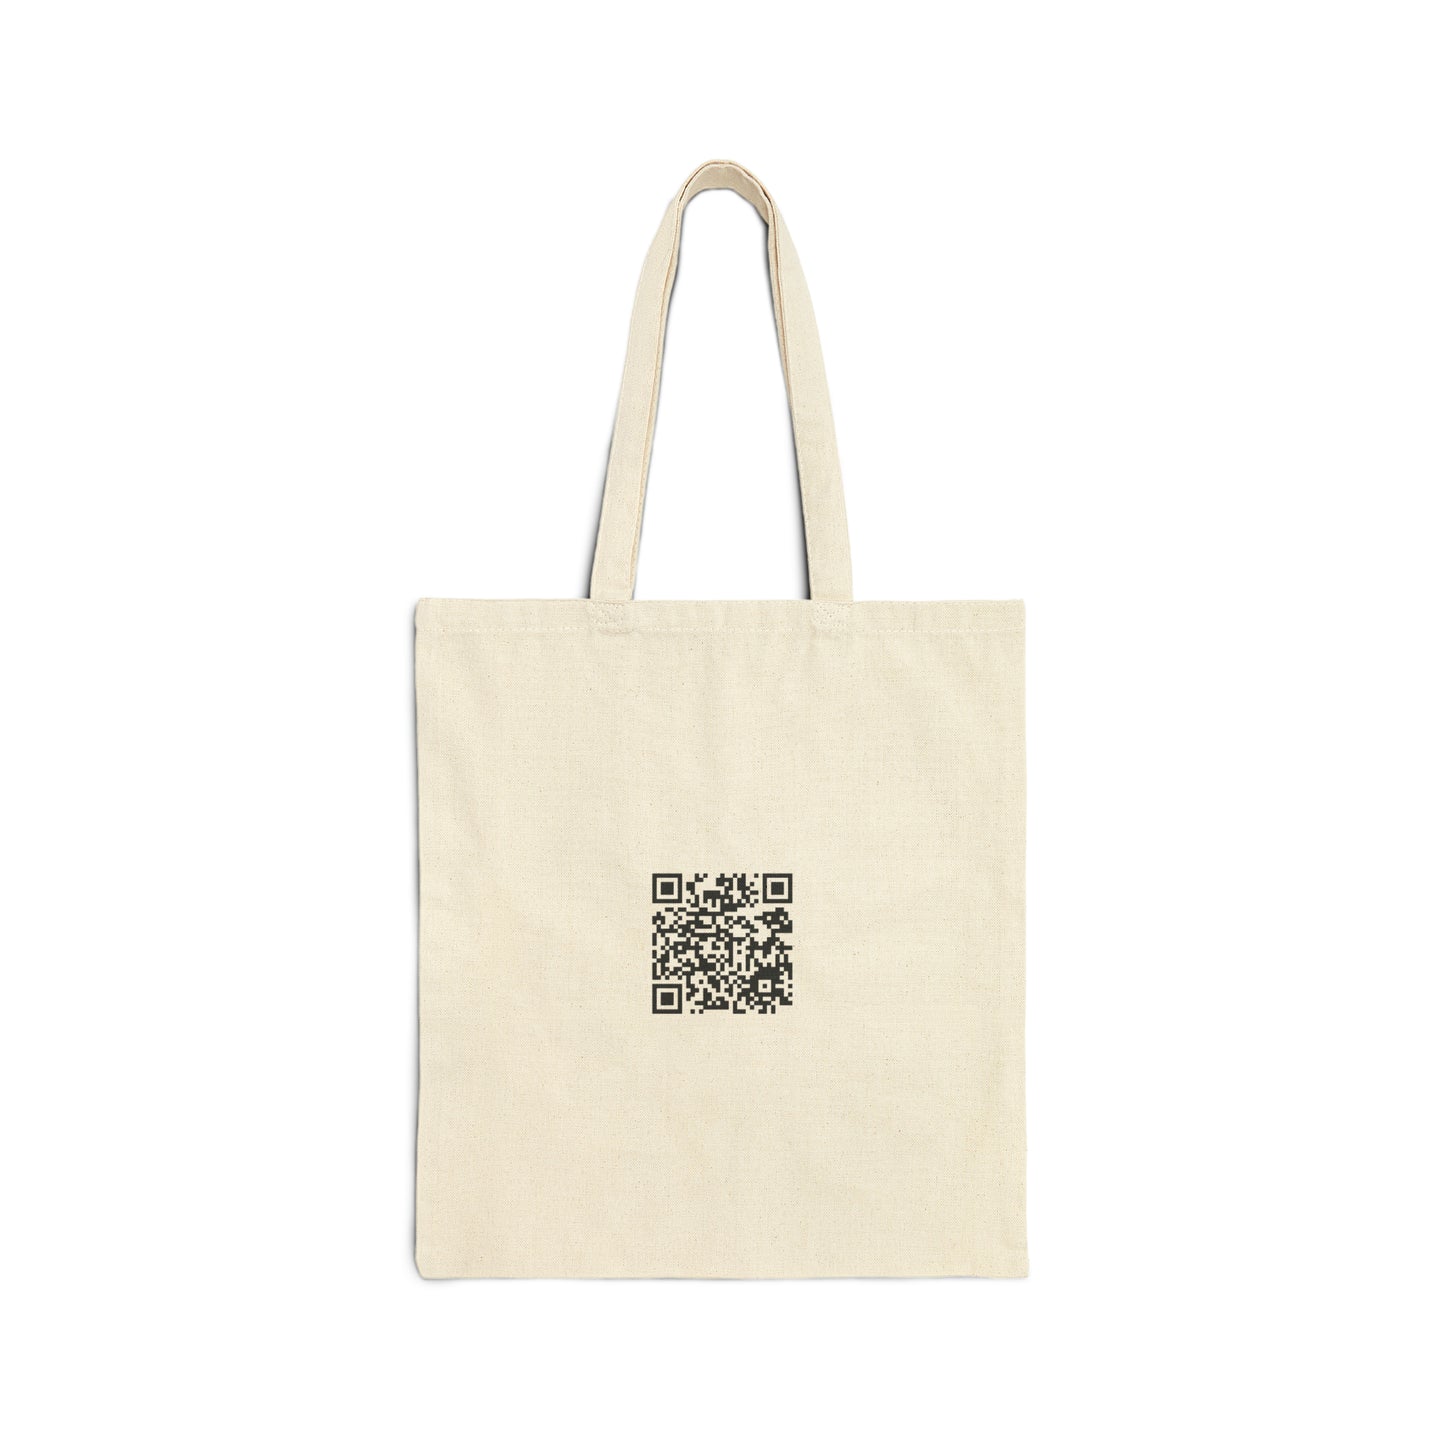 Overstretched - Cotton Canvas Tote Bag